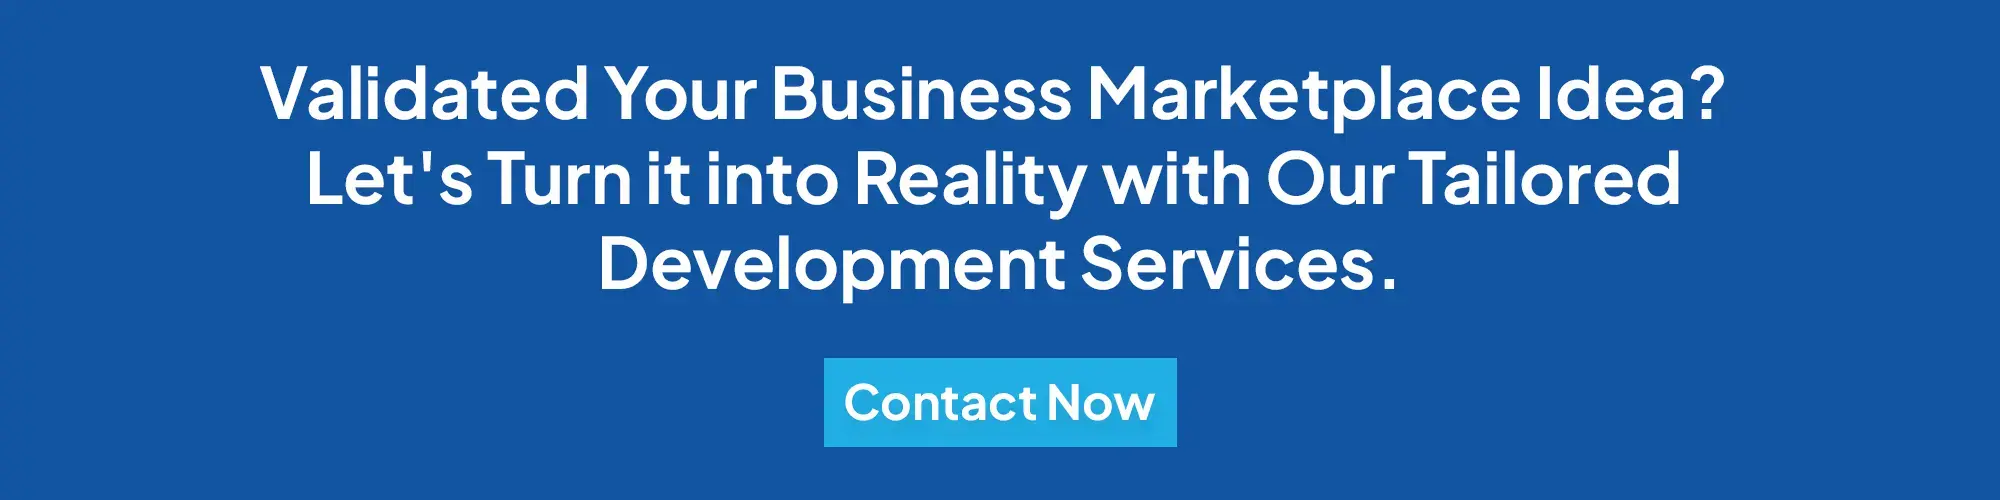 Validated Your Business Marketplace Idea? Let's Turn it into Reality with Our Tailored Development Services. CTA